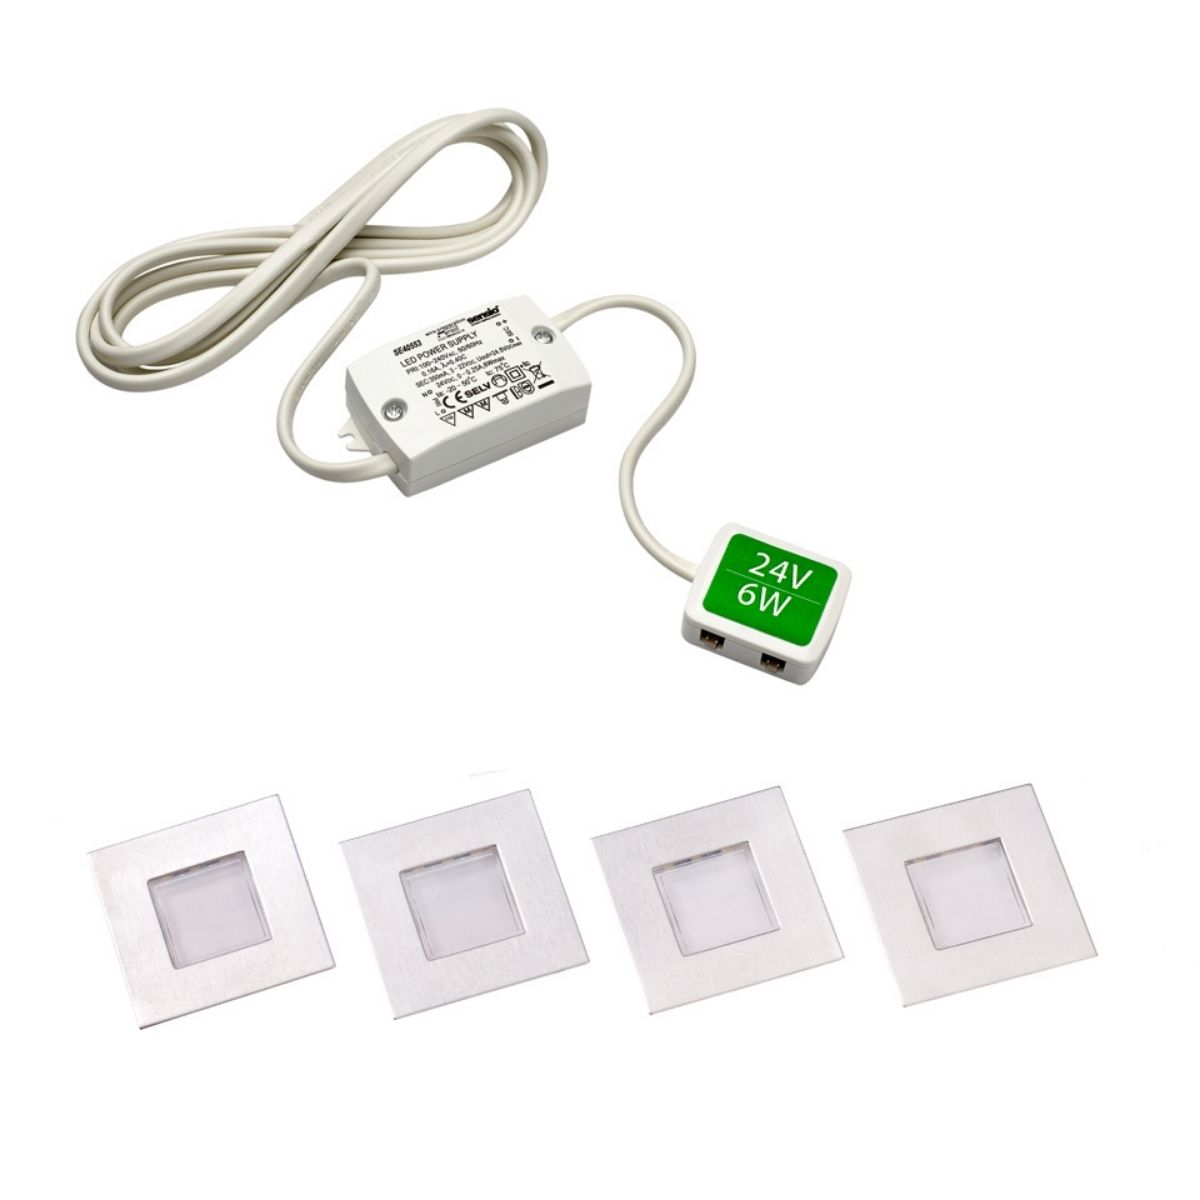 View Square LED Plinth Lights Pack of 4 Warm or Natural White information